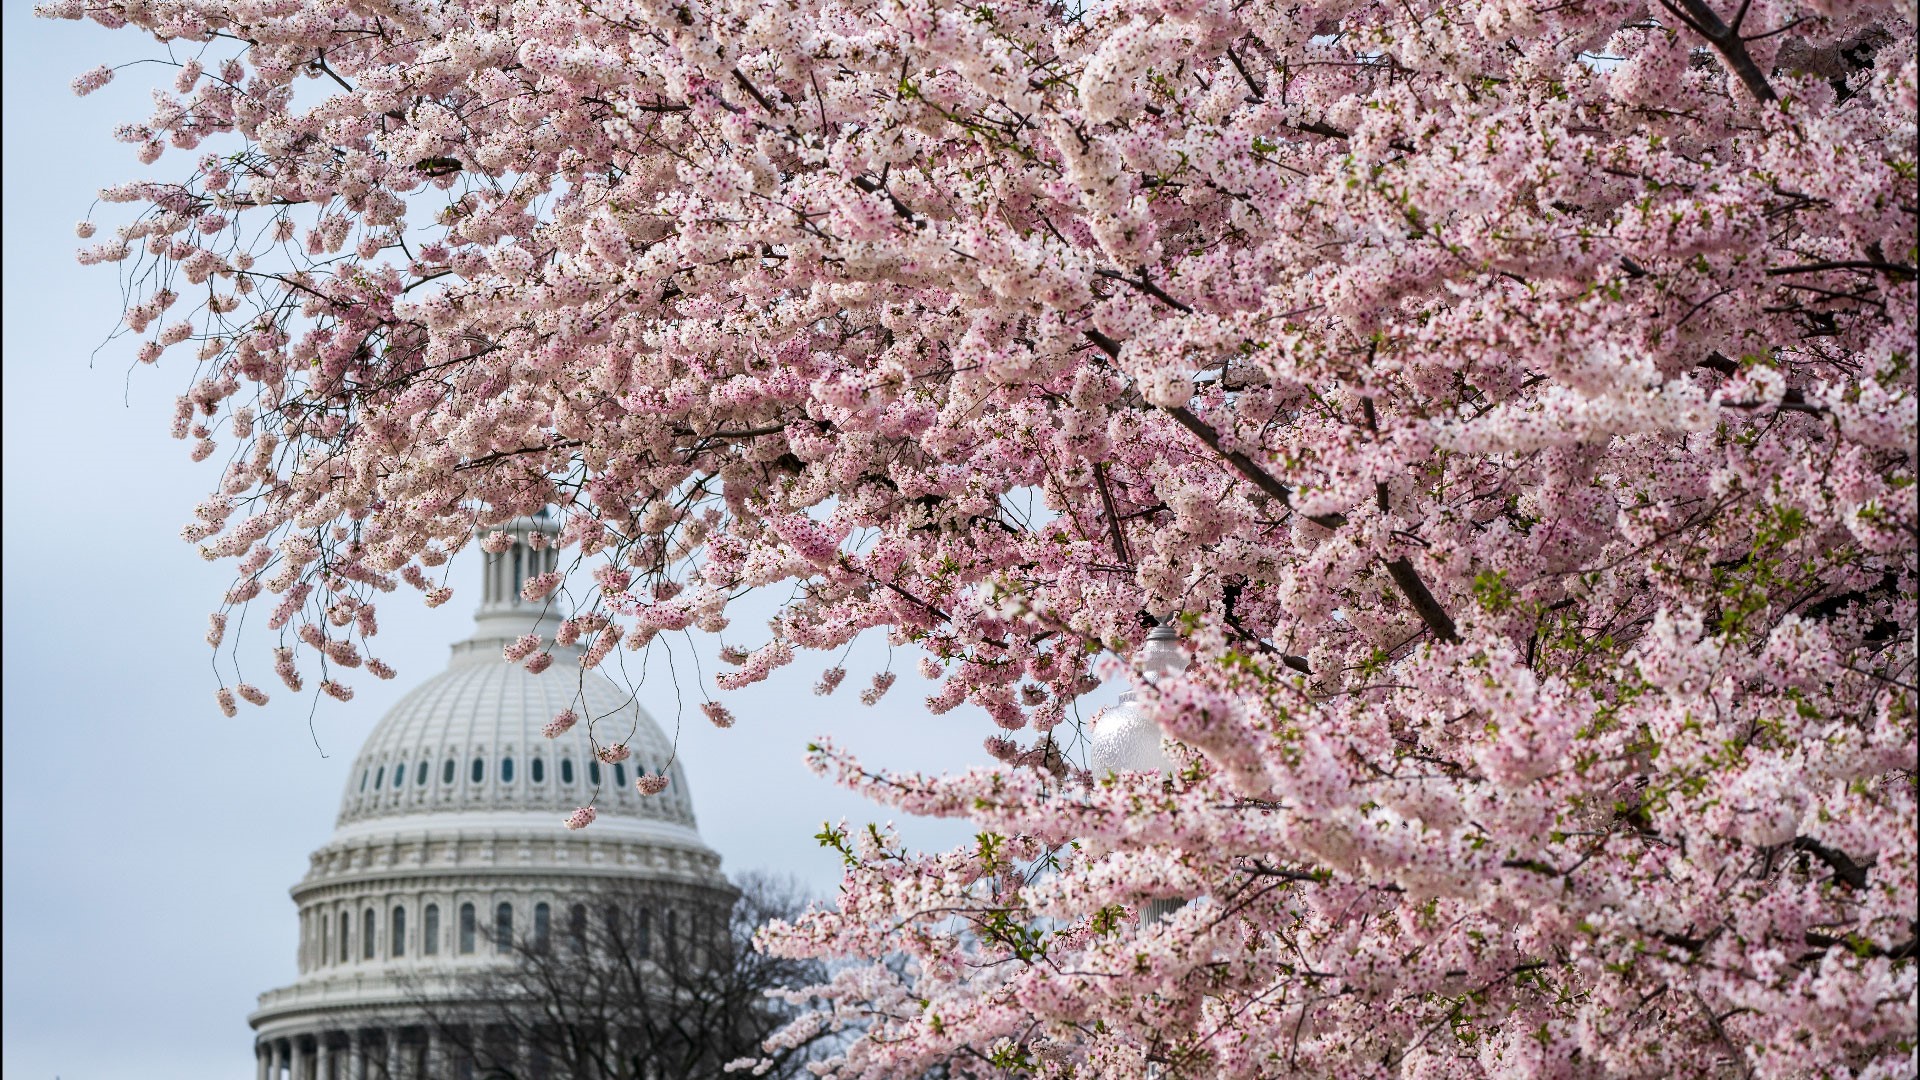 From your outfit to parking to blossom etiquette this guide will help you have the best cherry blossom experience!